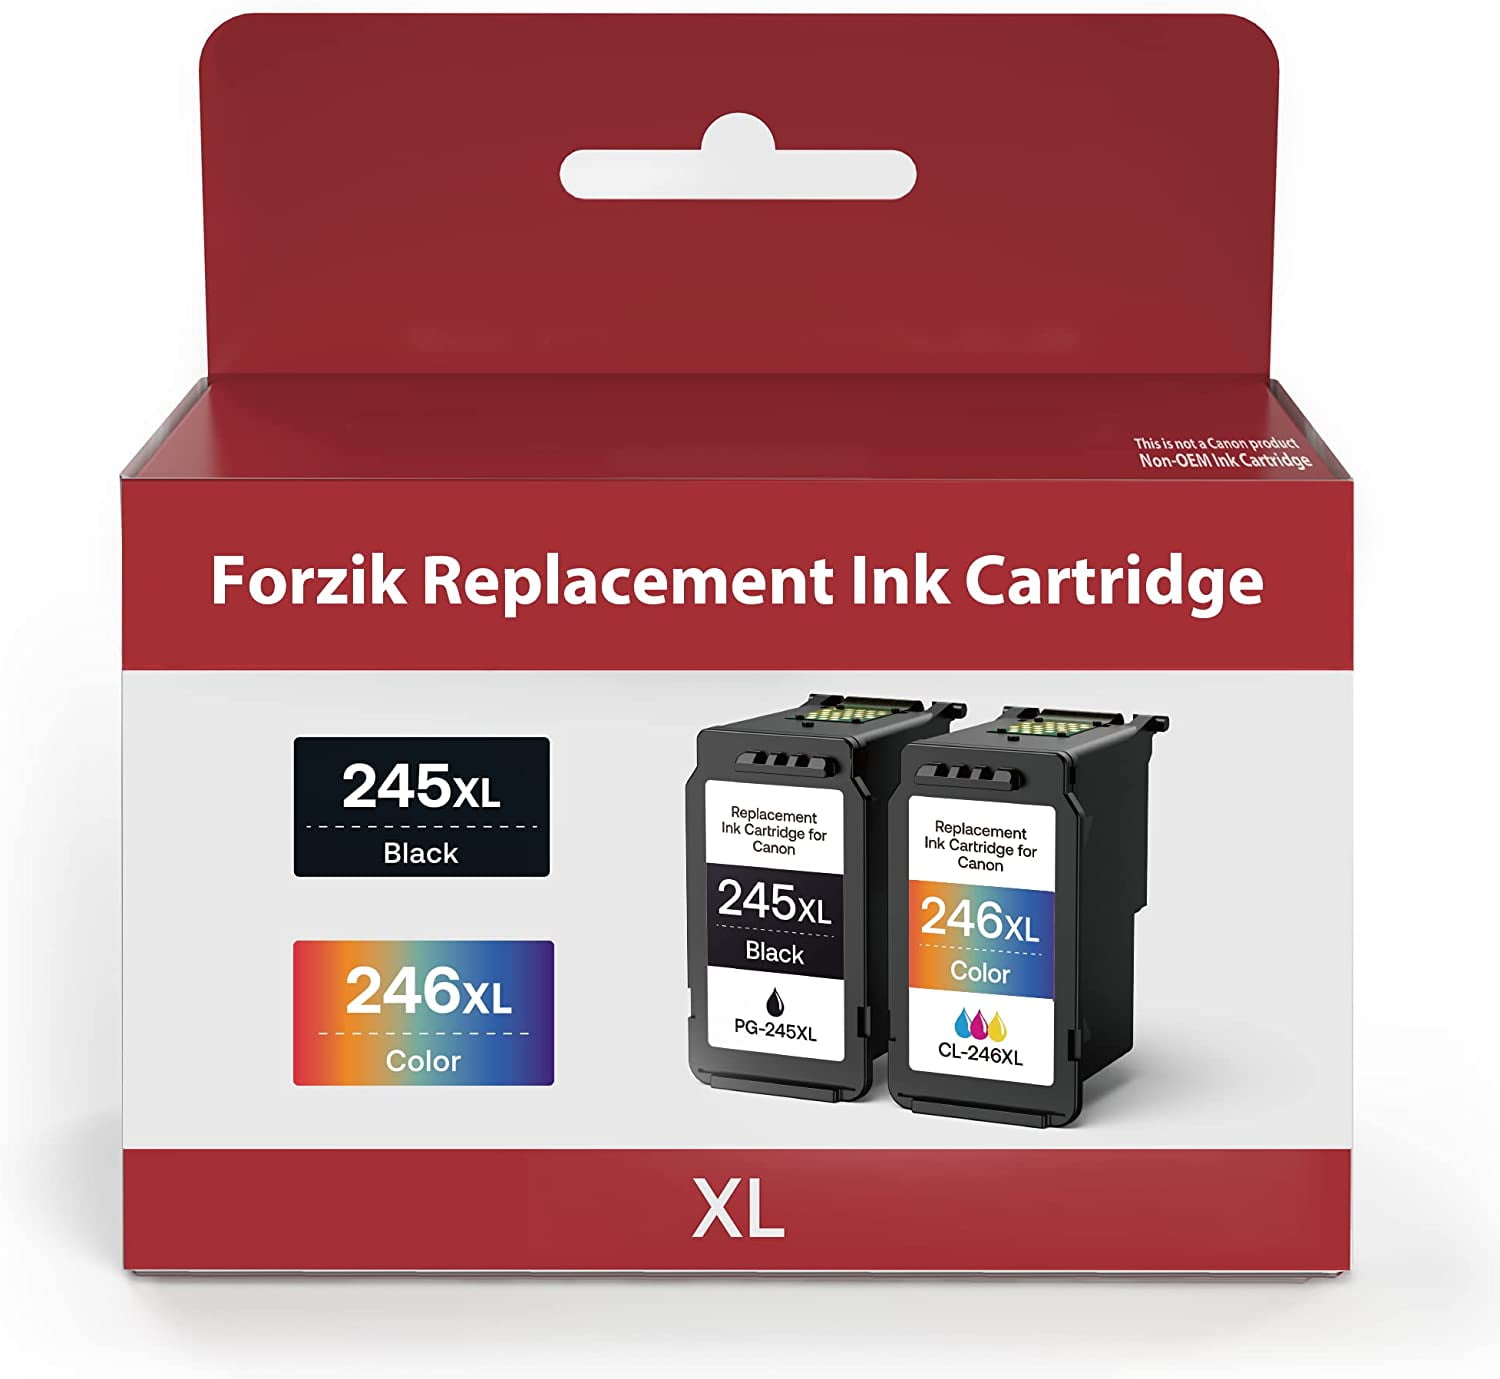 Ankink Higher Yield 245XL Ink Cartridges 2 Black Combo Pack for Canon PG 243 245 XL Fit for Cannon Pixma MX490 MX492 MG2522 TS3100 TS3122 TS3300 TS3320 TS3322 TR4500 TR4520 TR4522 MG2500 Printer PG245 